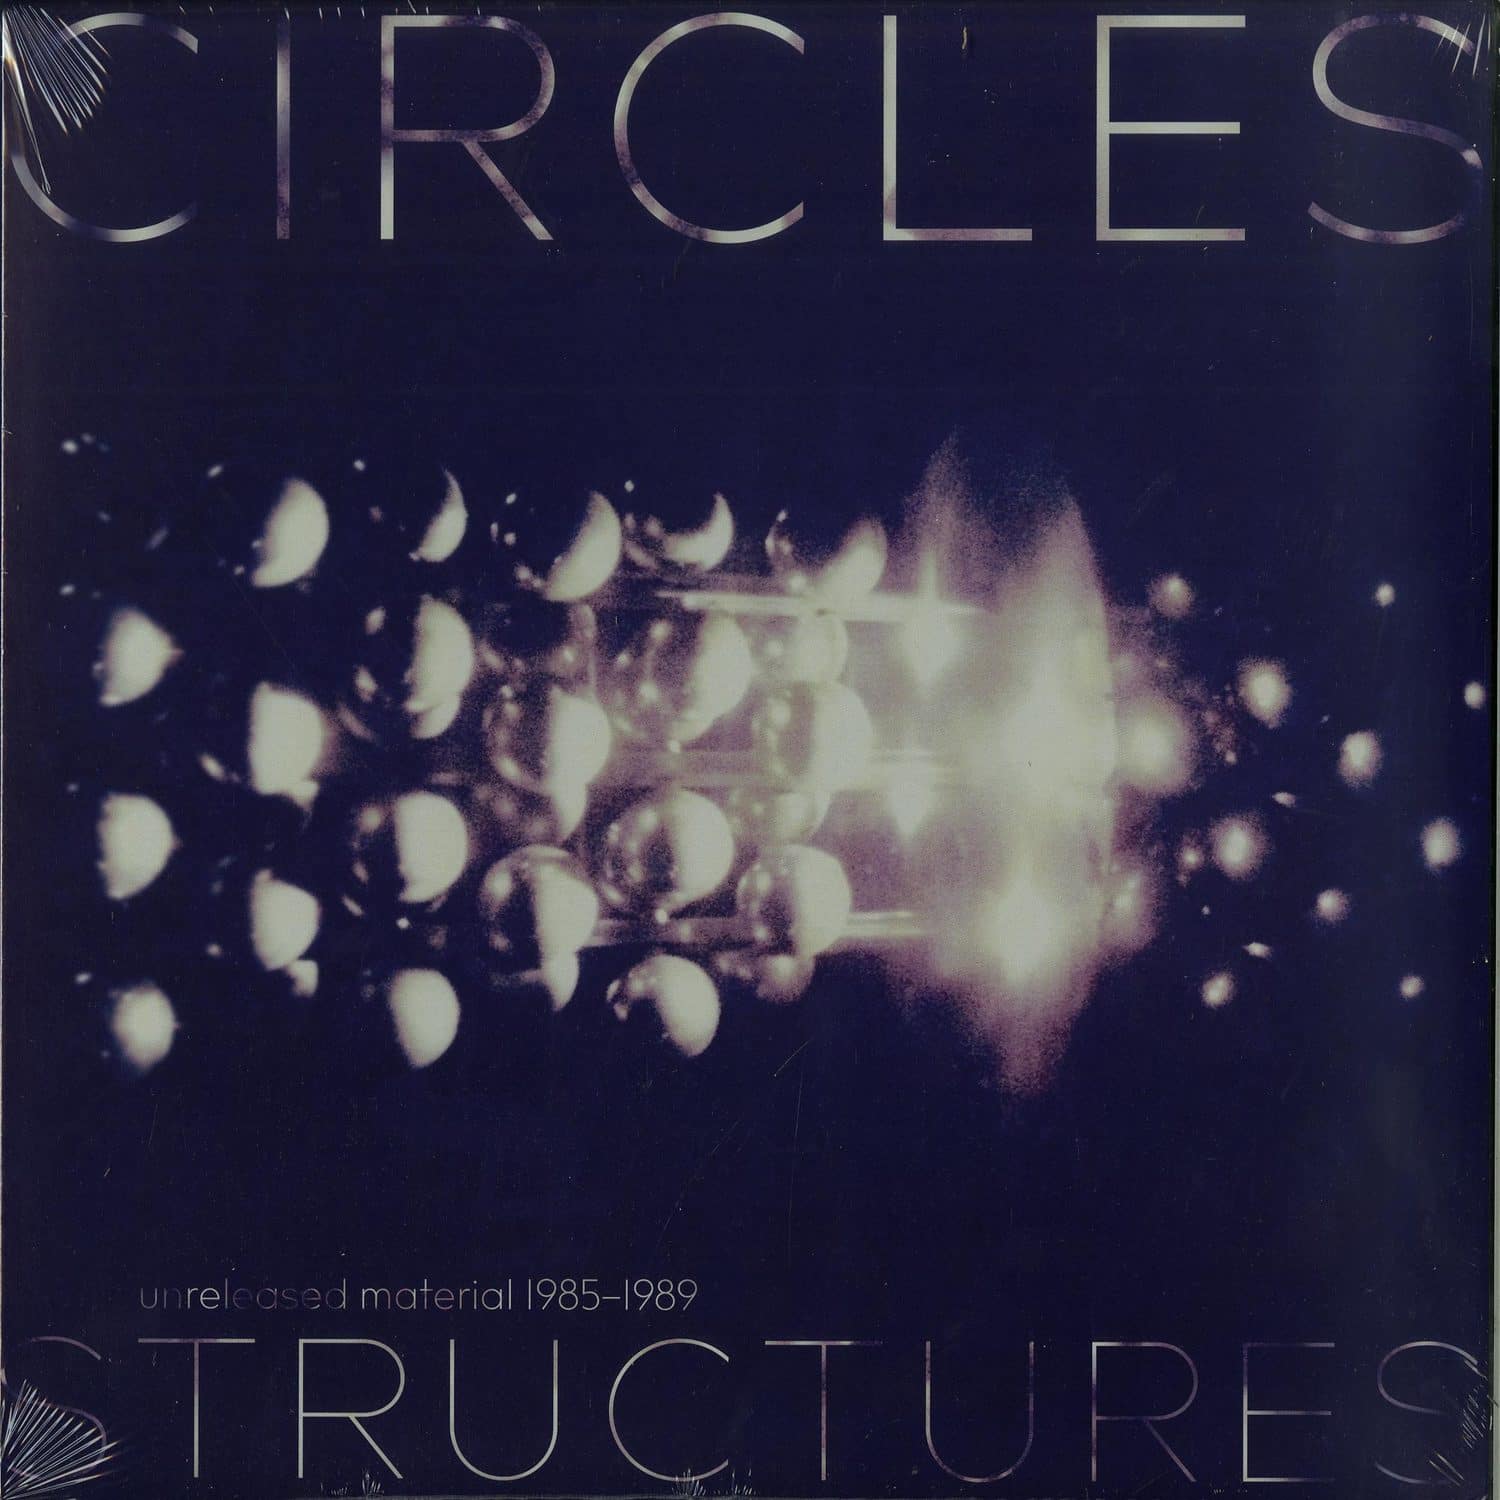 Circles - STRUCTURES - UNRELEASED MATERIAL 1985-1989 